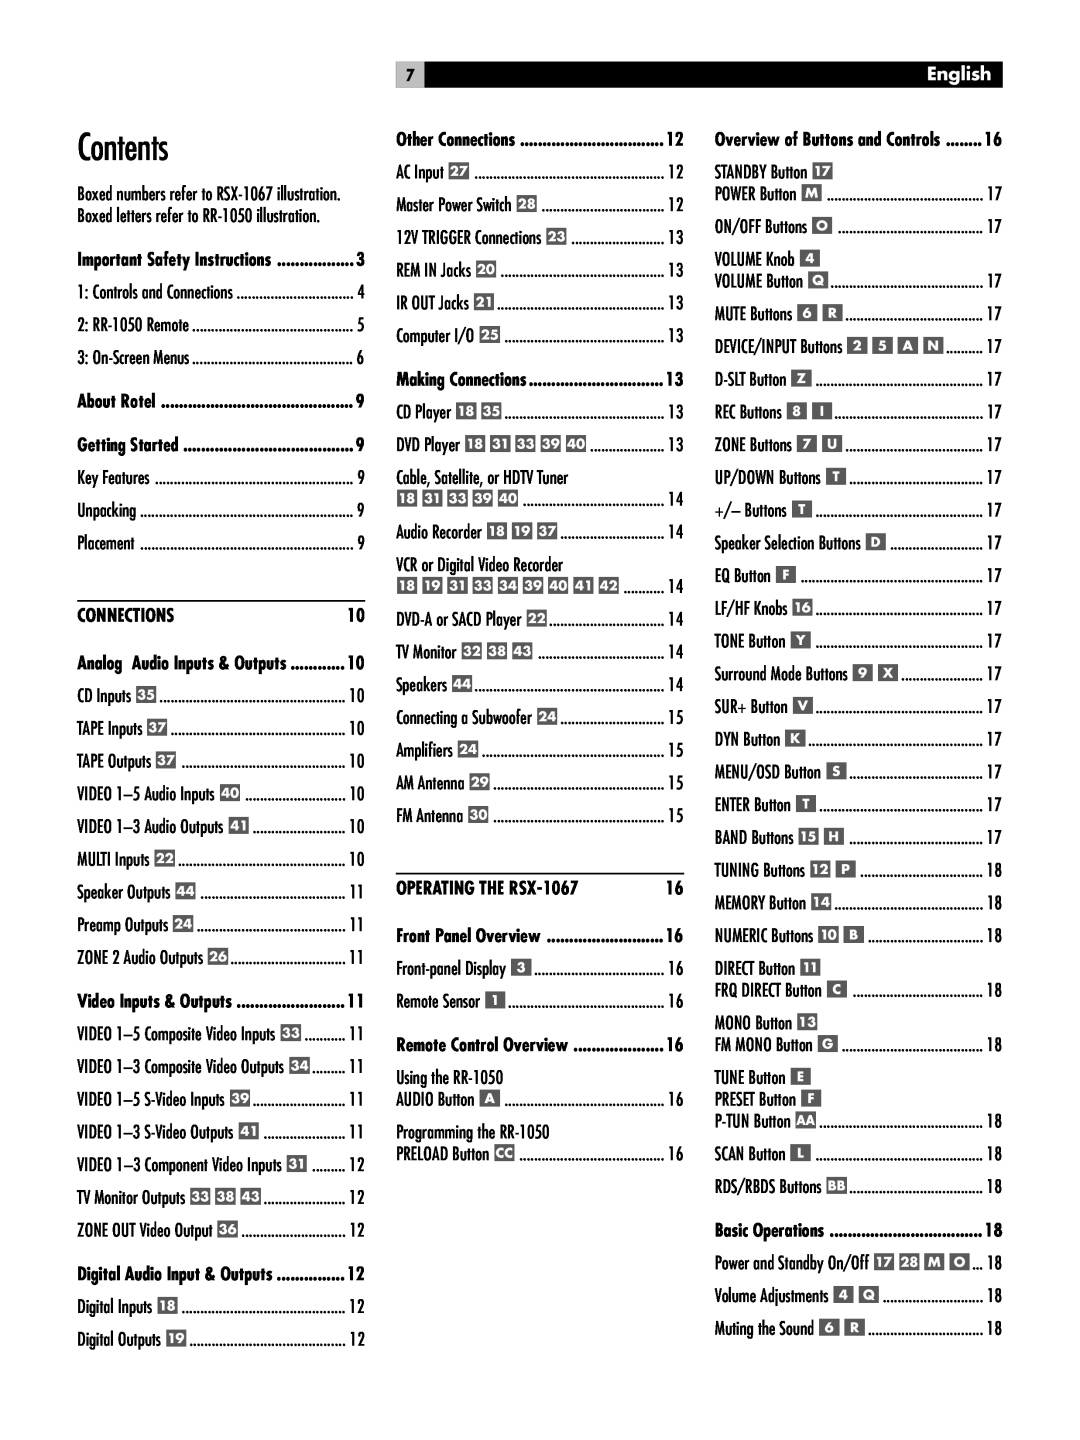 Rotel owner manual Contents, Connections, OPERATING THE RSX-1067, English 